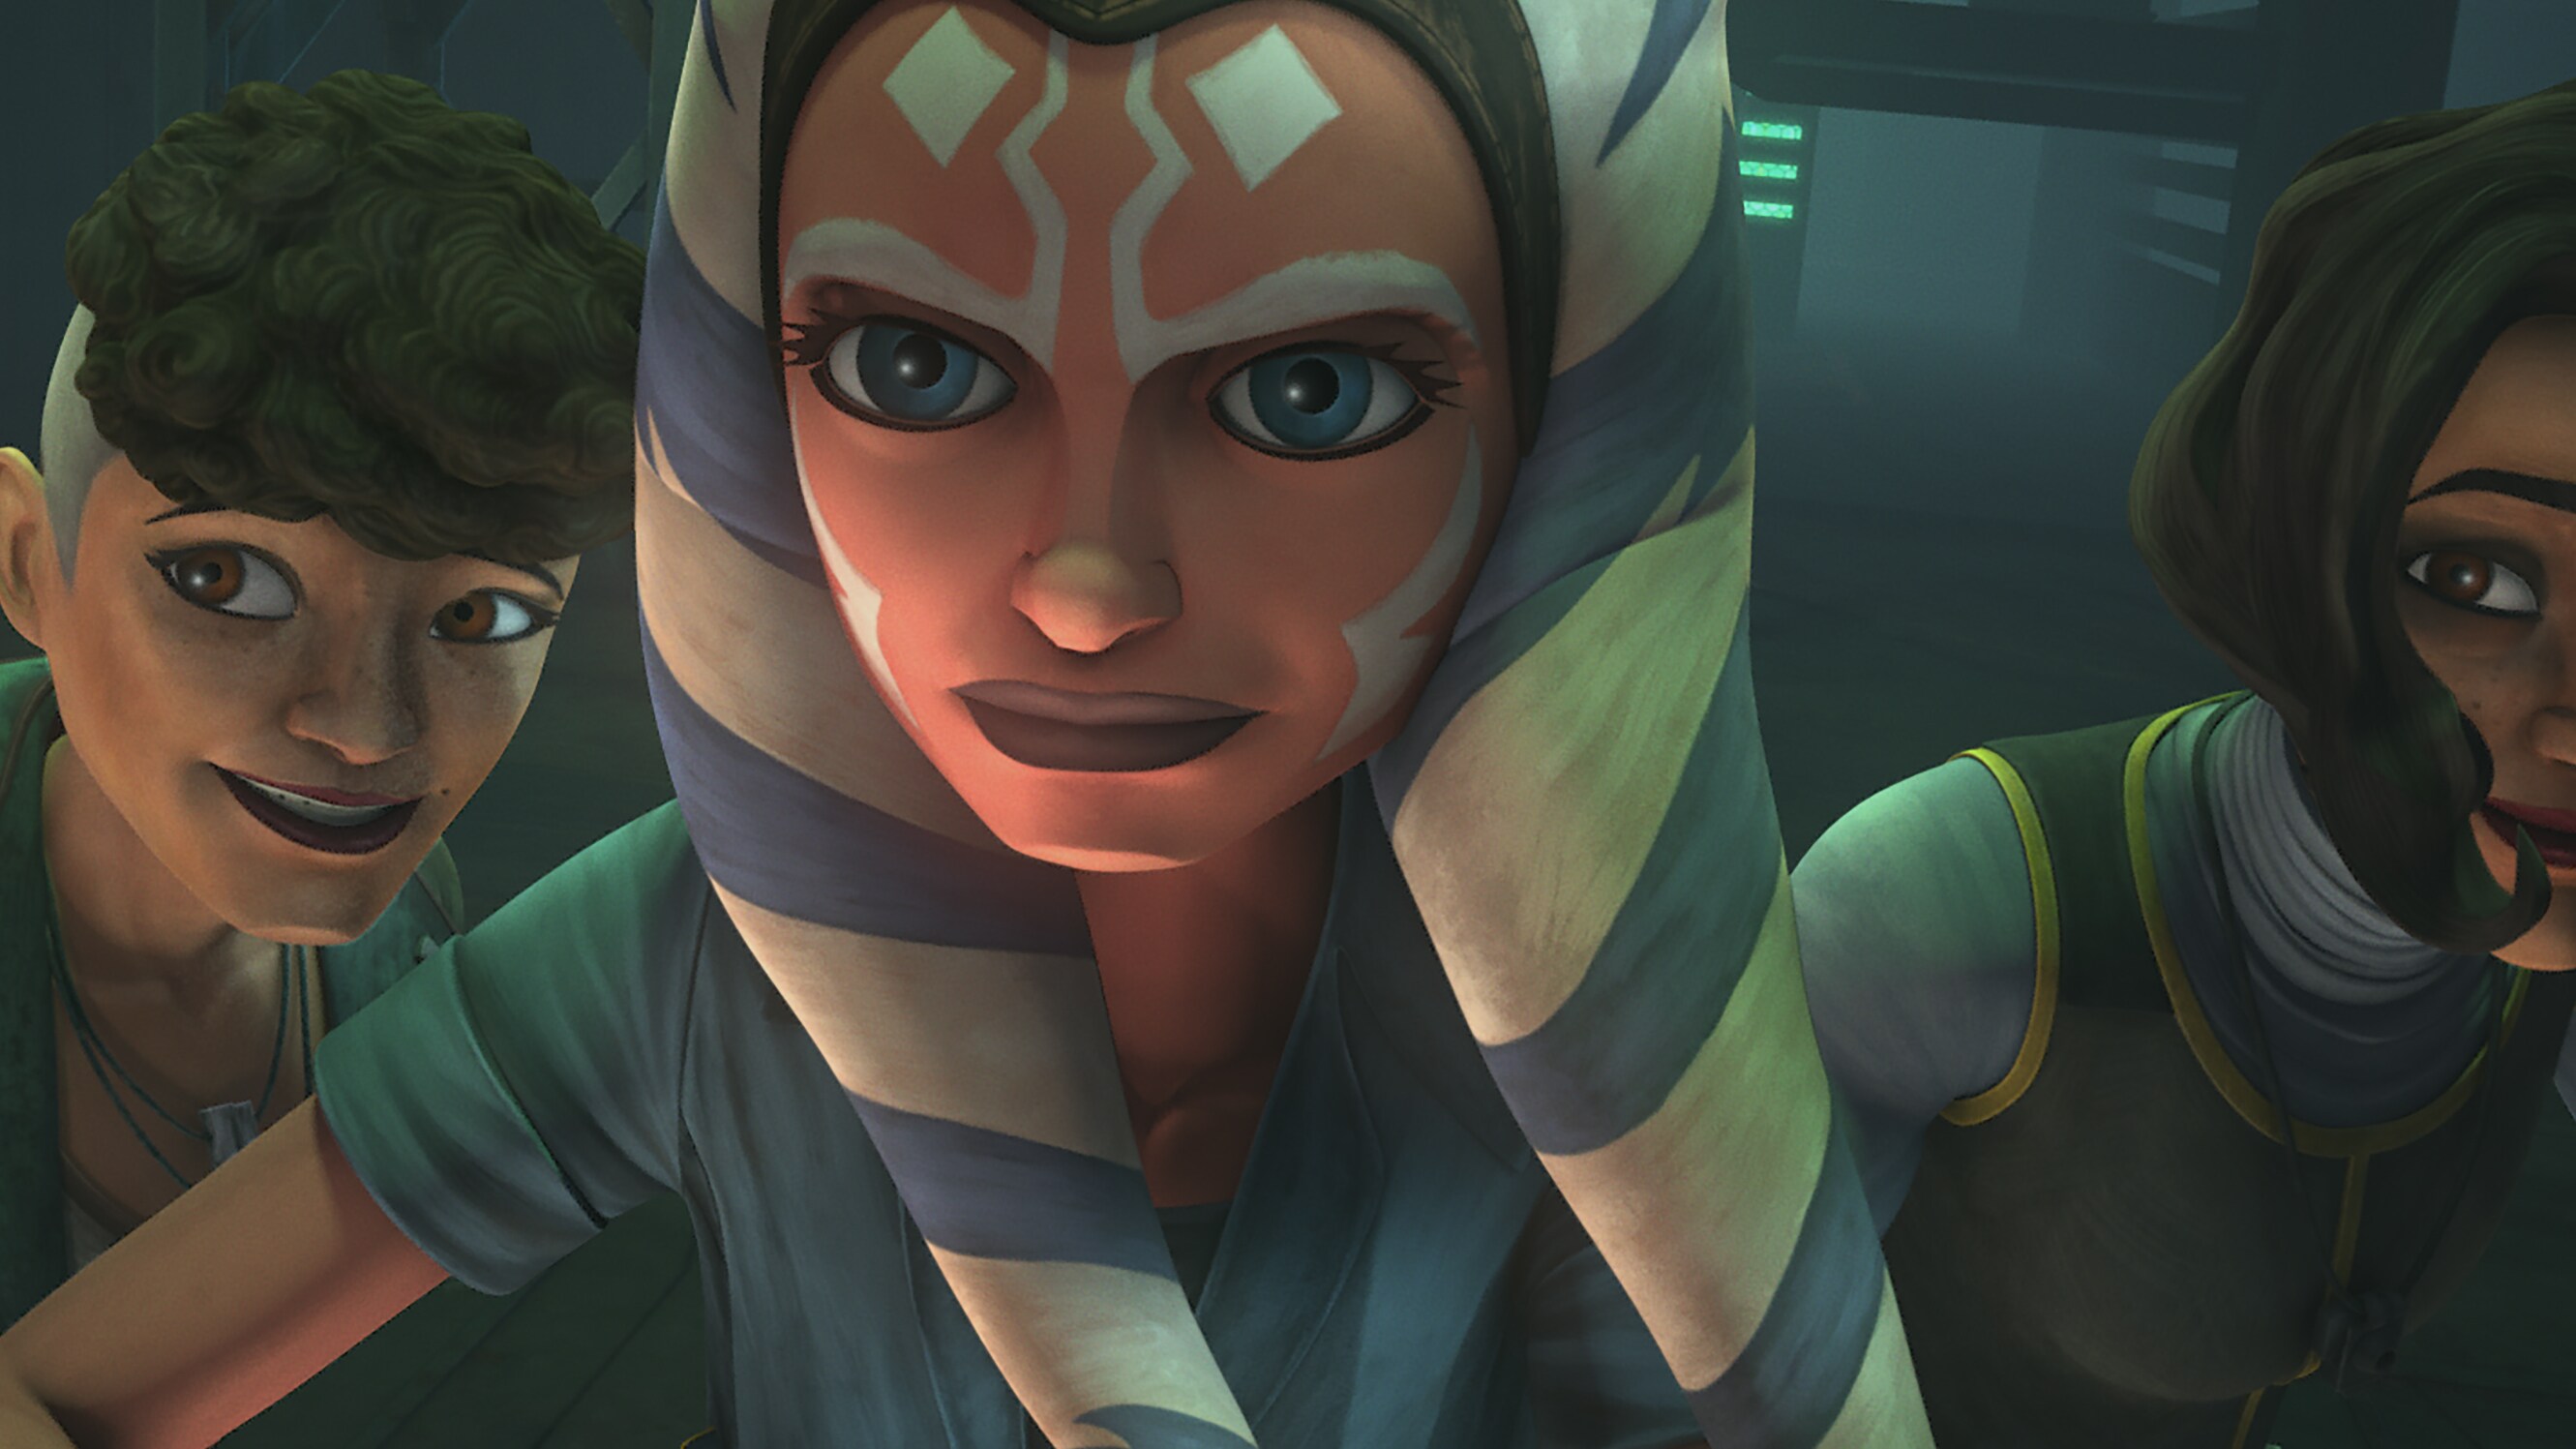 Trace, Ahsoka and Rafa plan a daring escape from the Pykes in STAR WARS: THE CLONE WARS, exclusively on Disney+.